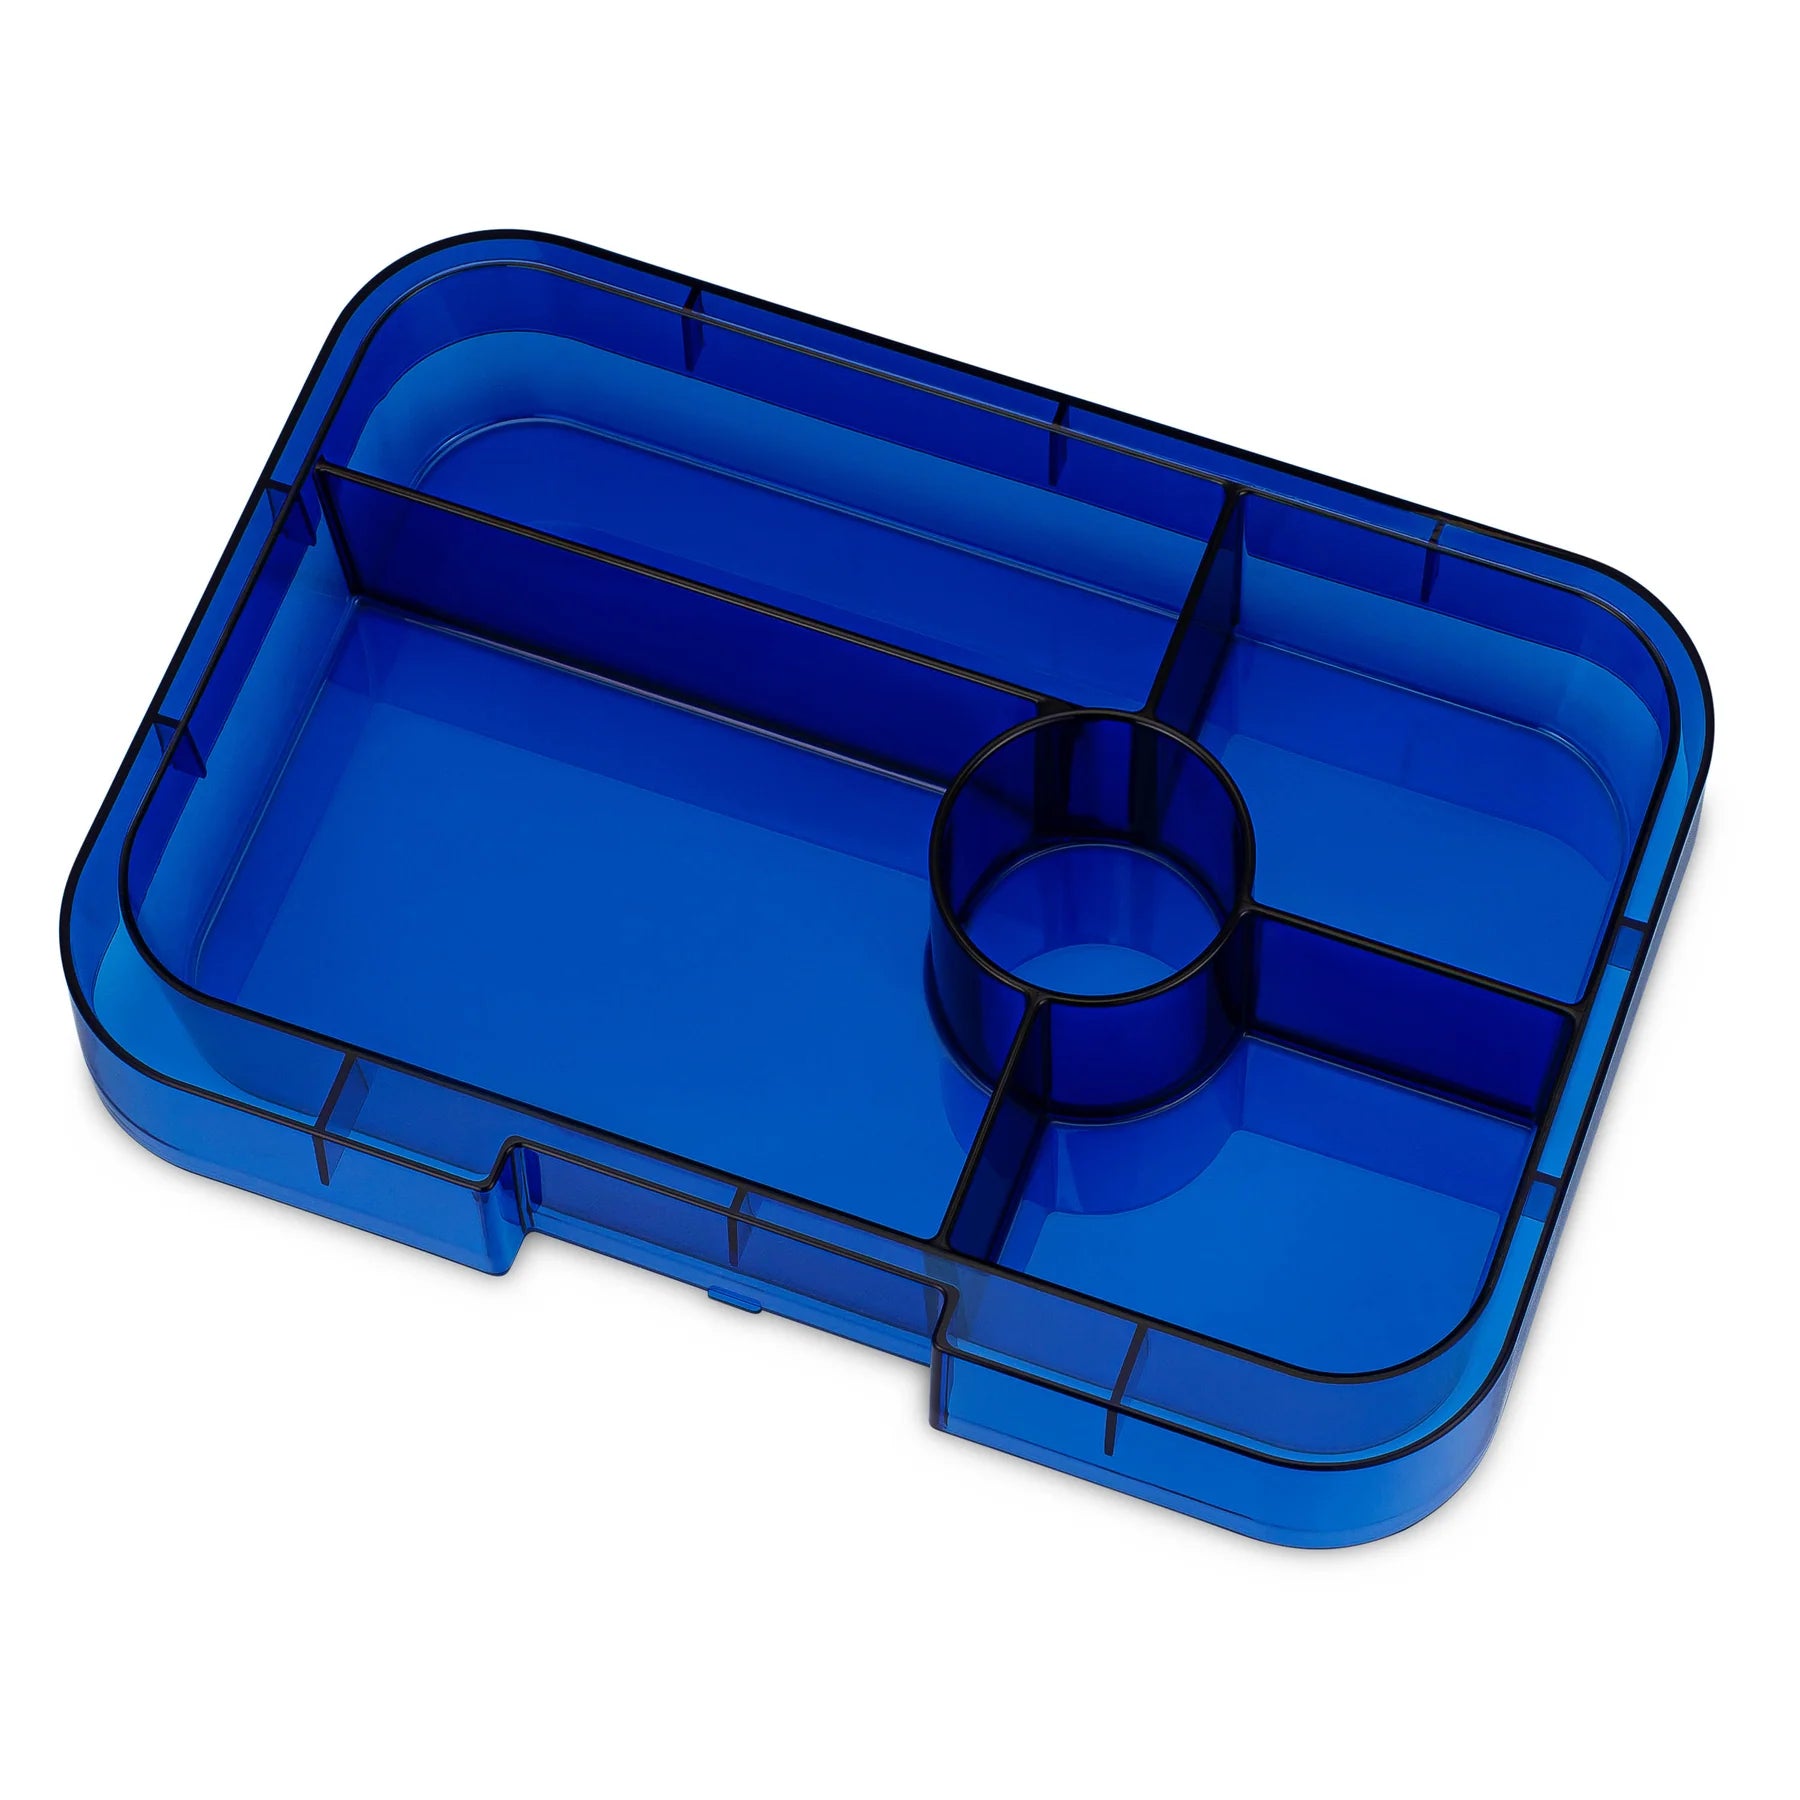 Yumbox Tapas 5-Compartment Food Tray - Monte Carlo Blue/Clear Navy 2